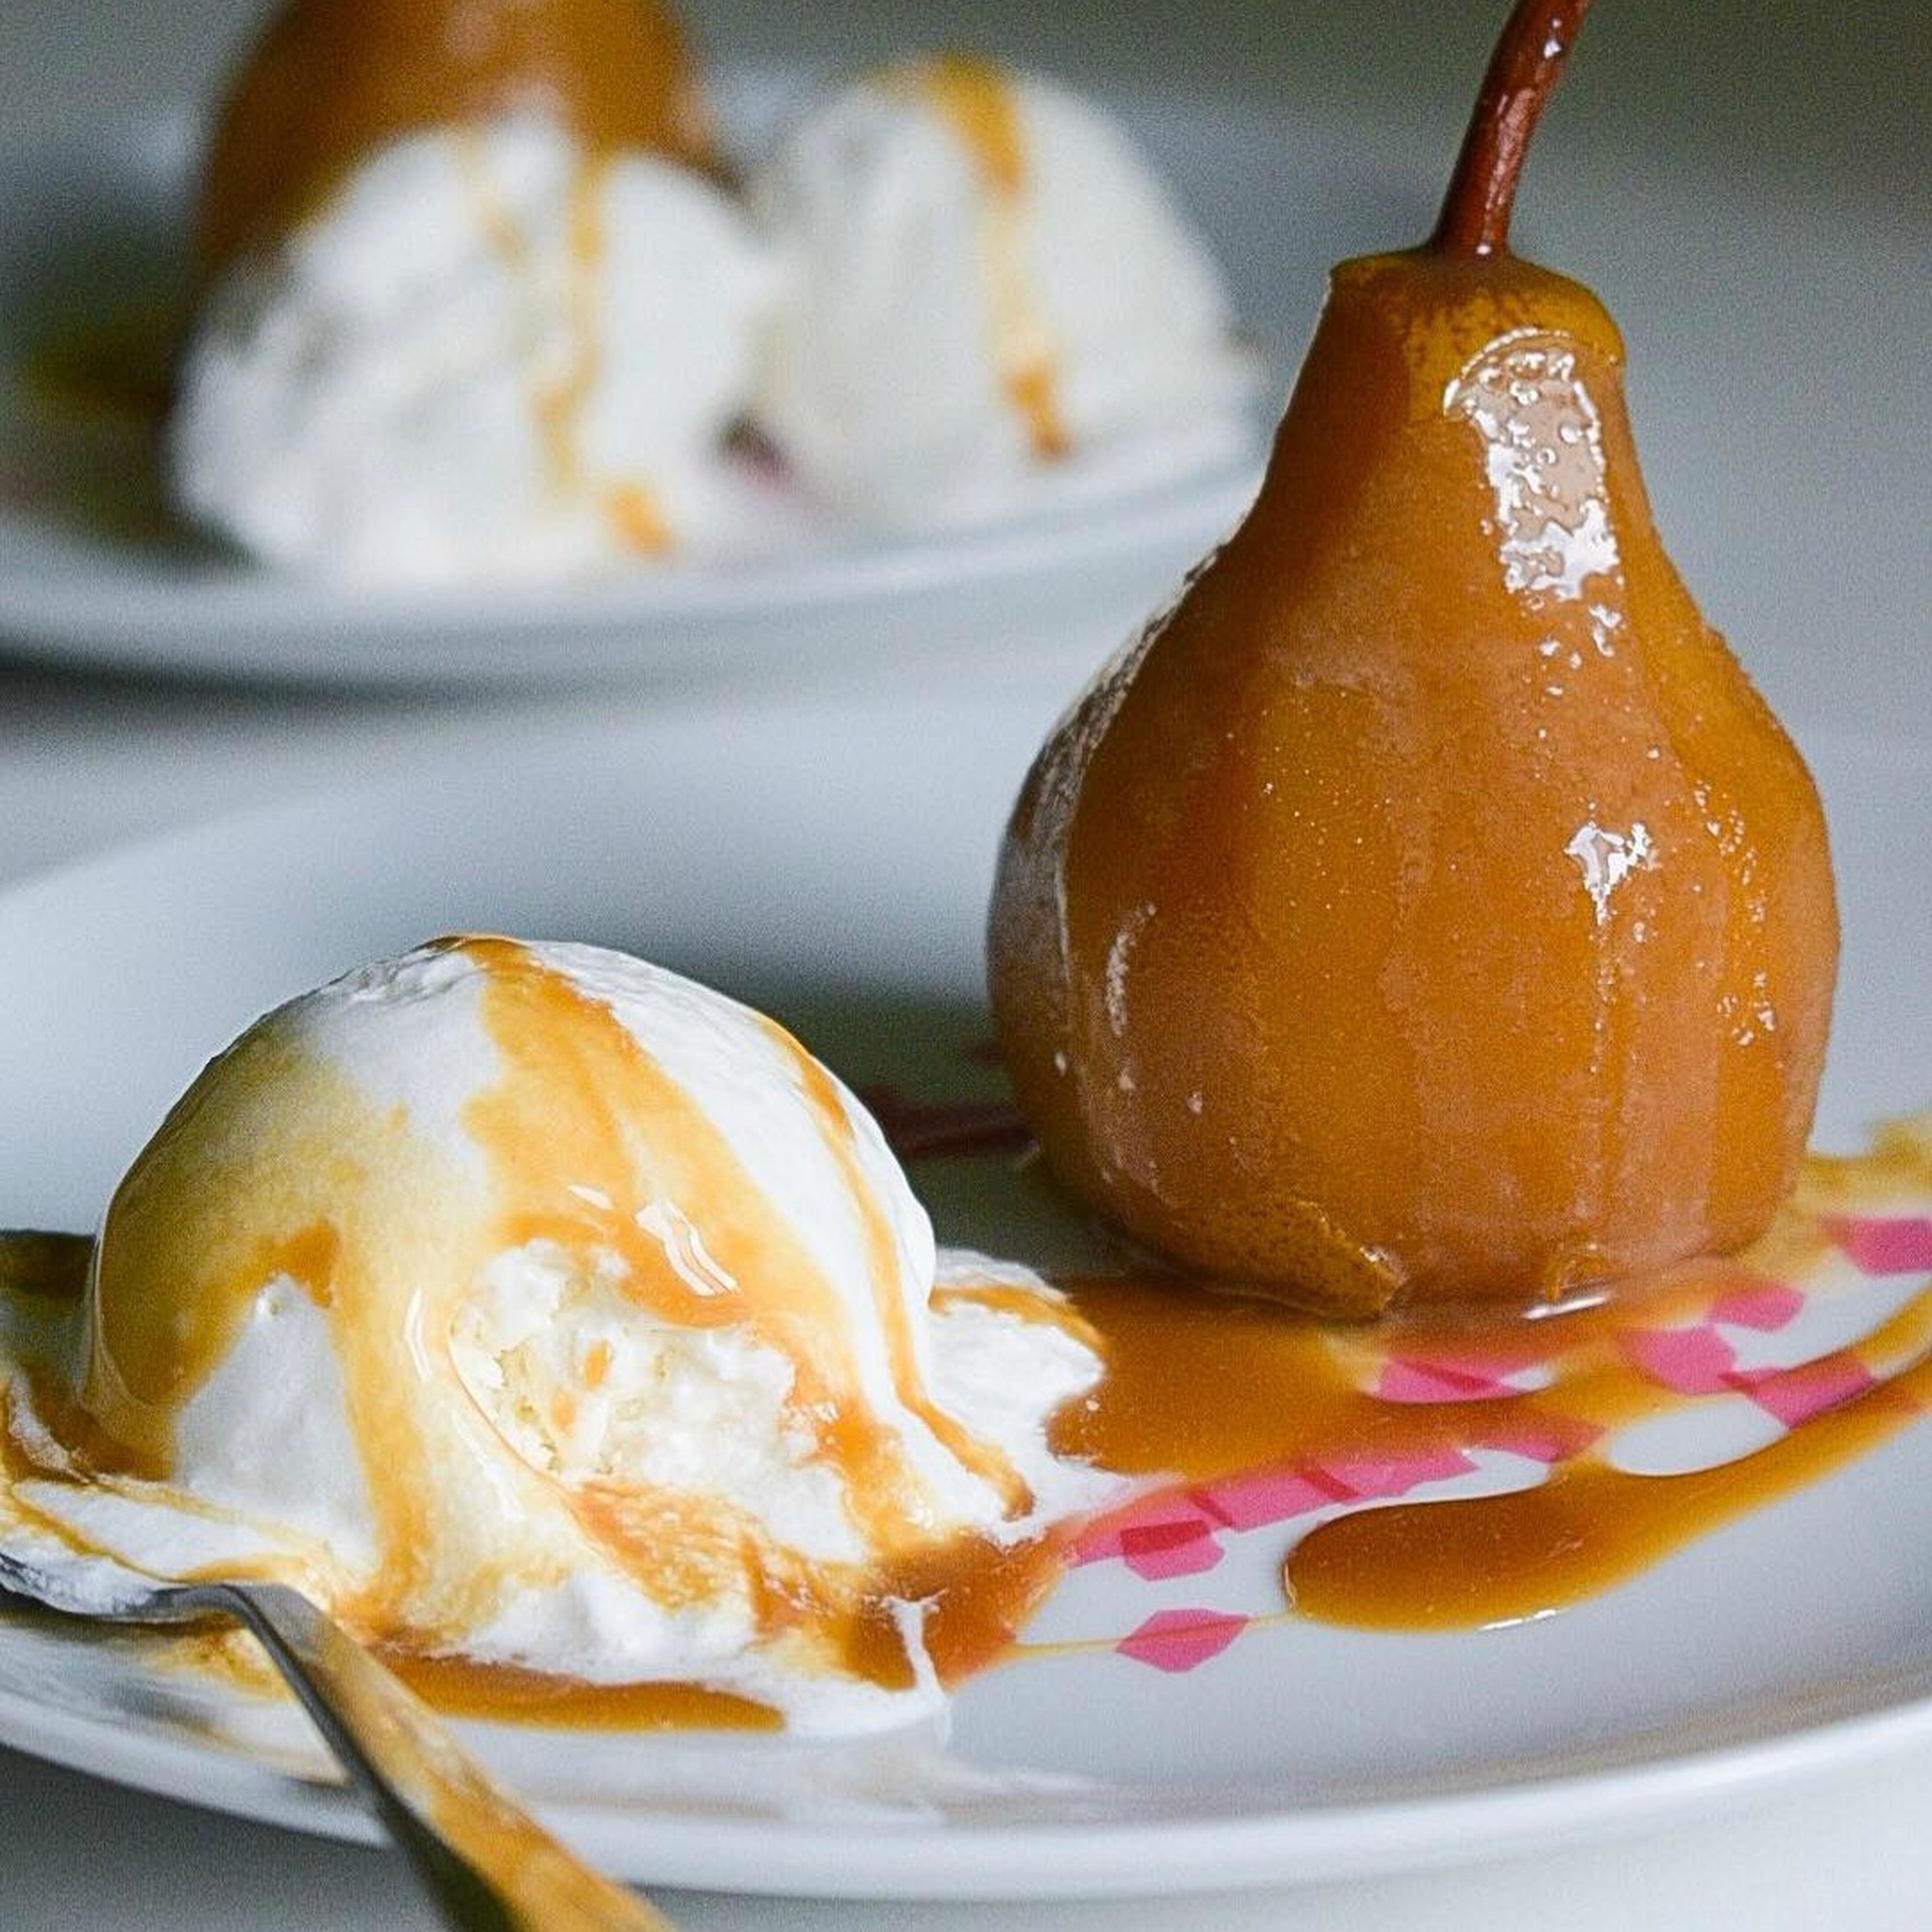 Poached pear with salted caramel and vanilla icecream